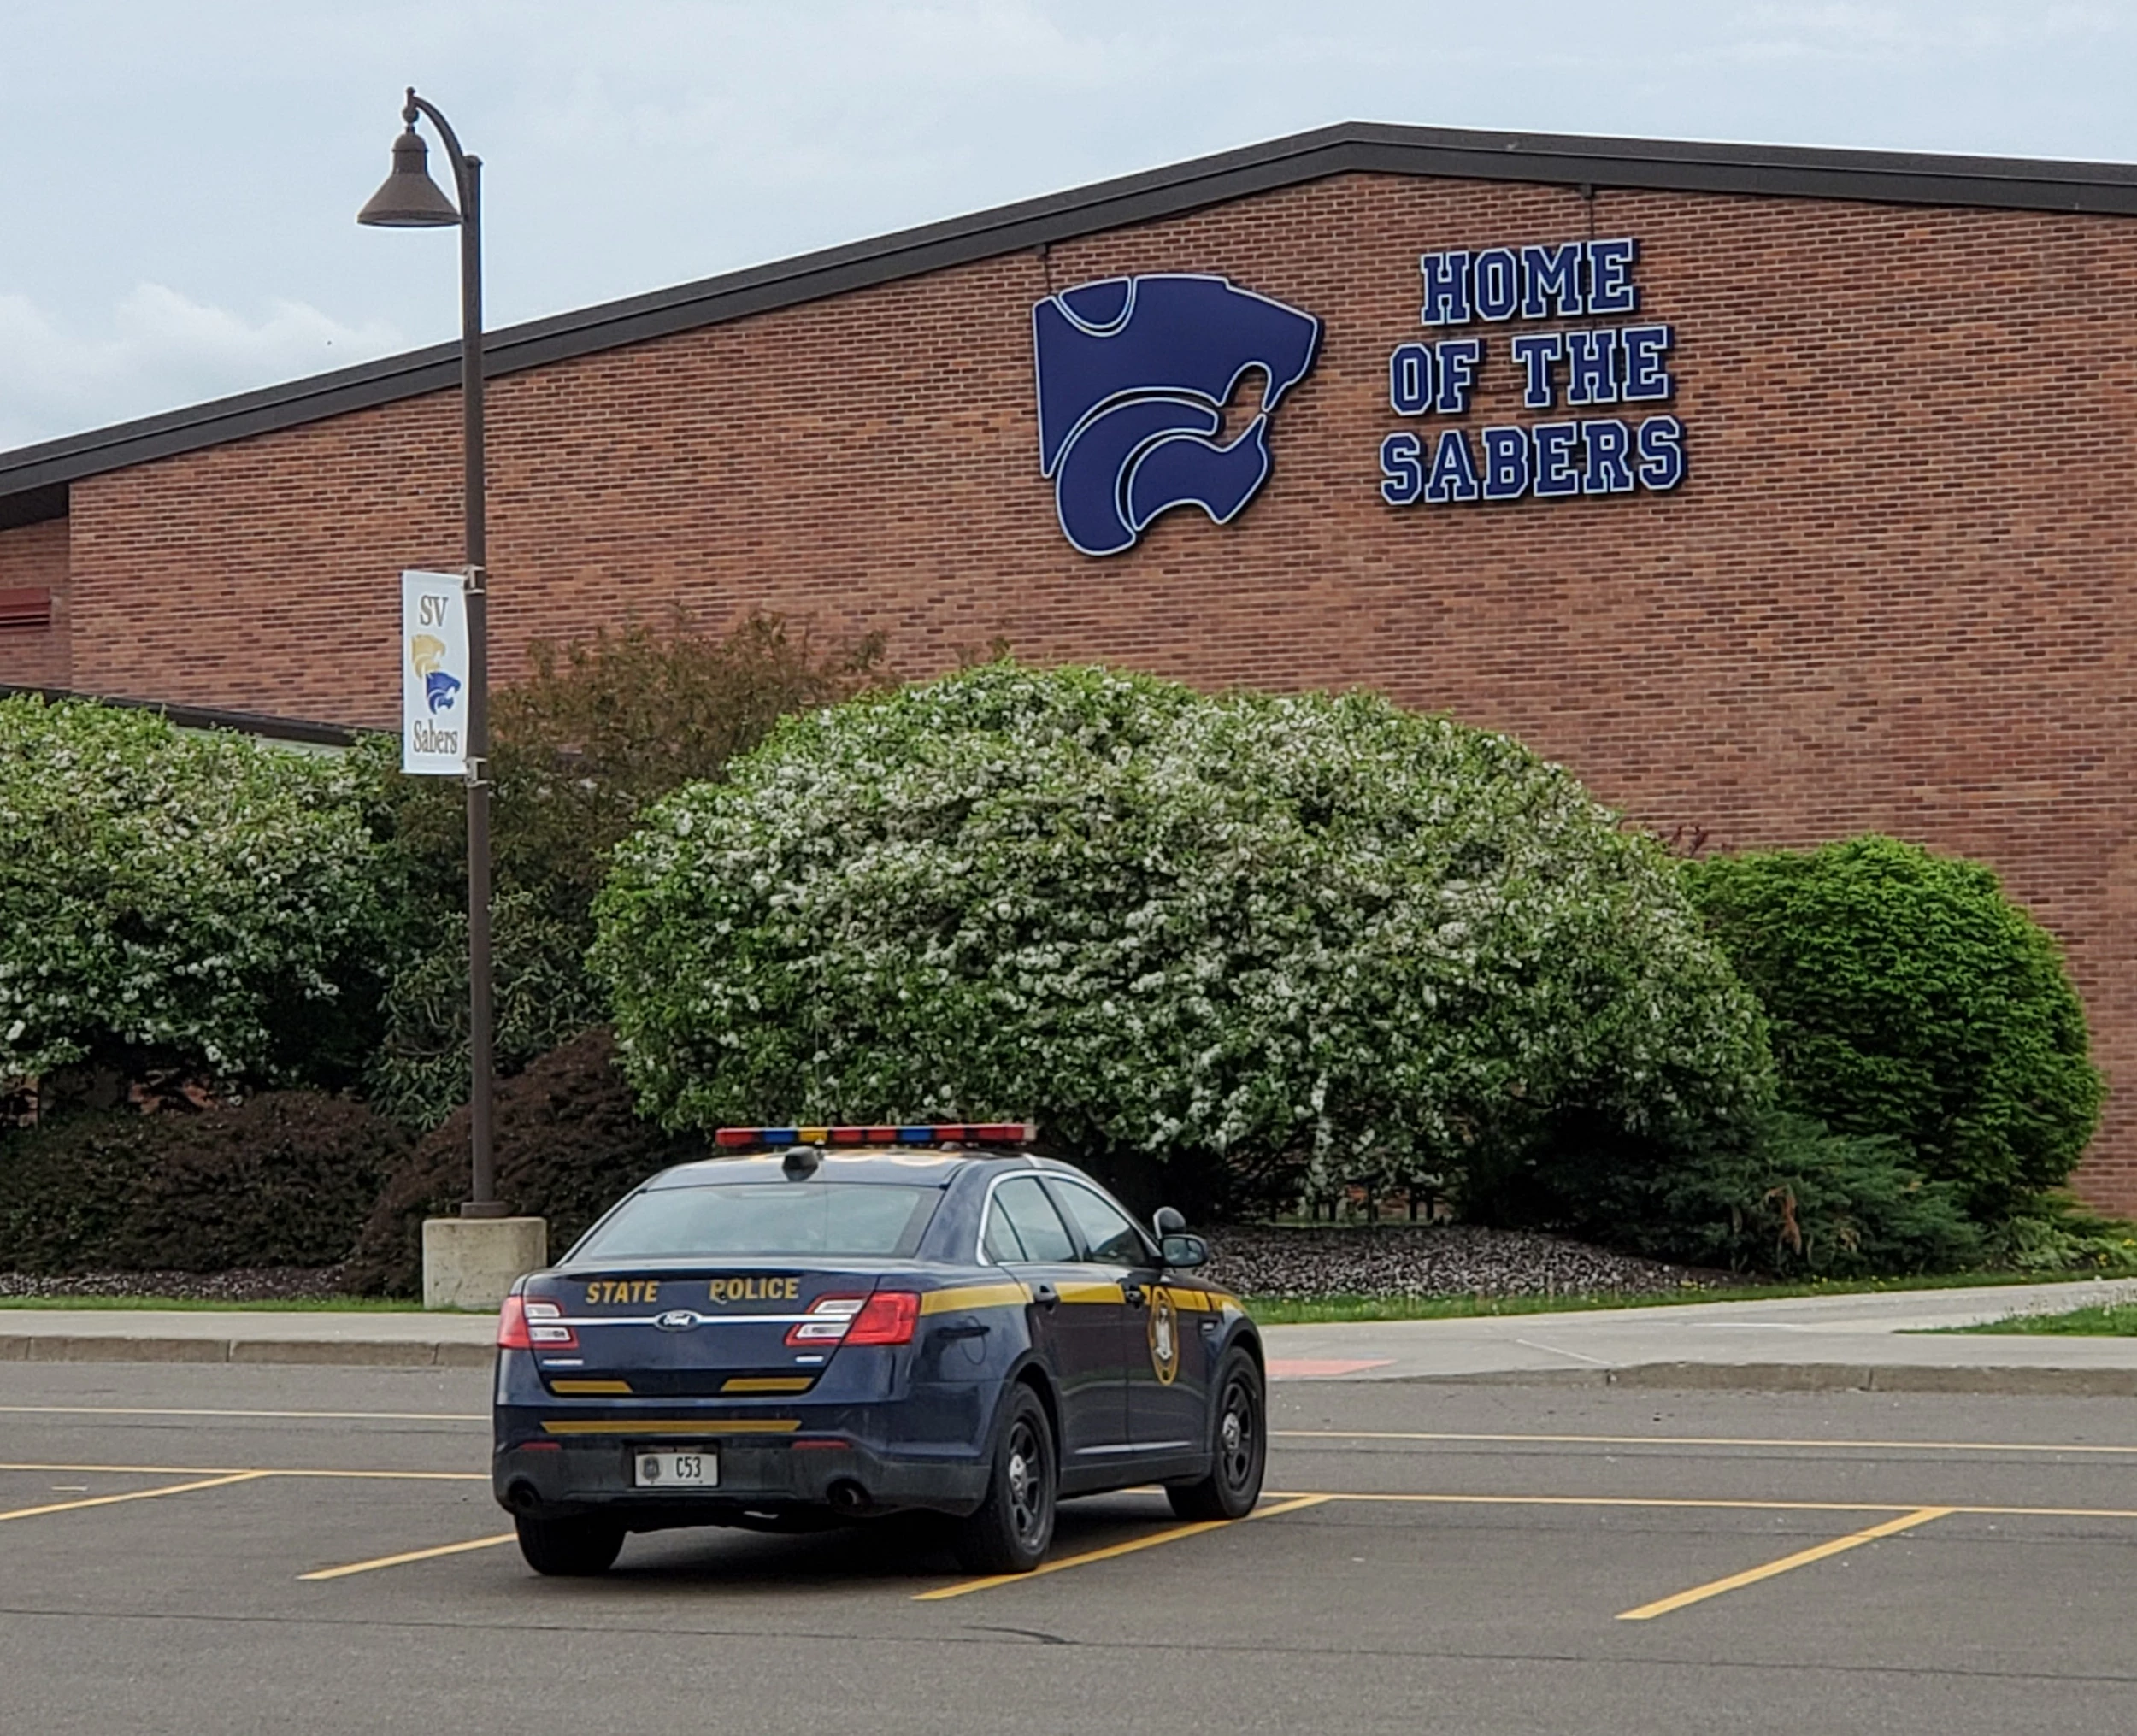 Police Presence Boosted at SV Schools After Buffalo Mass Shooting